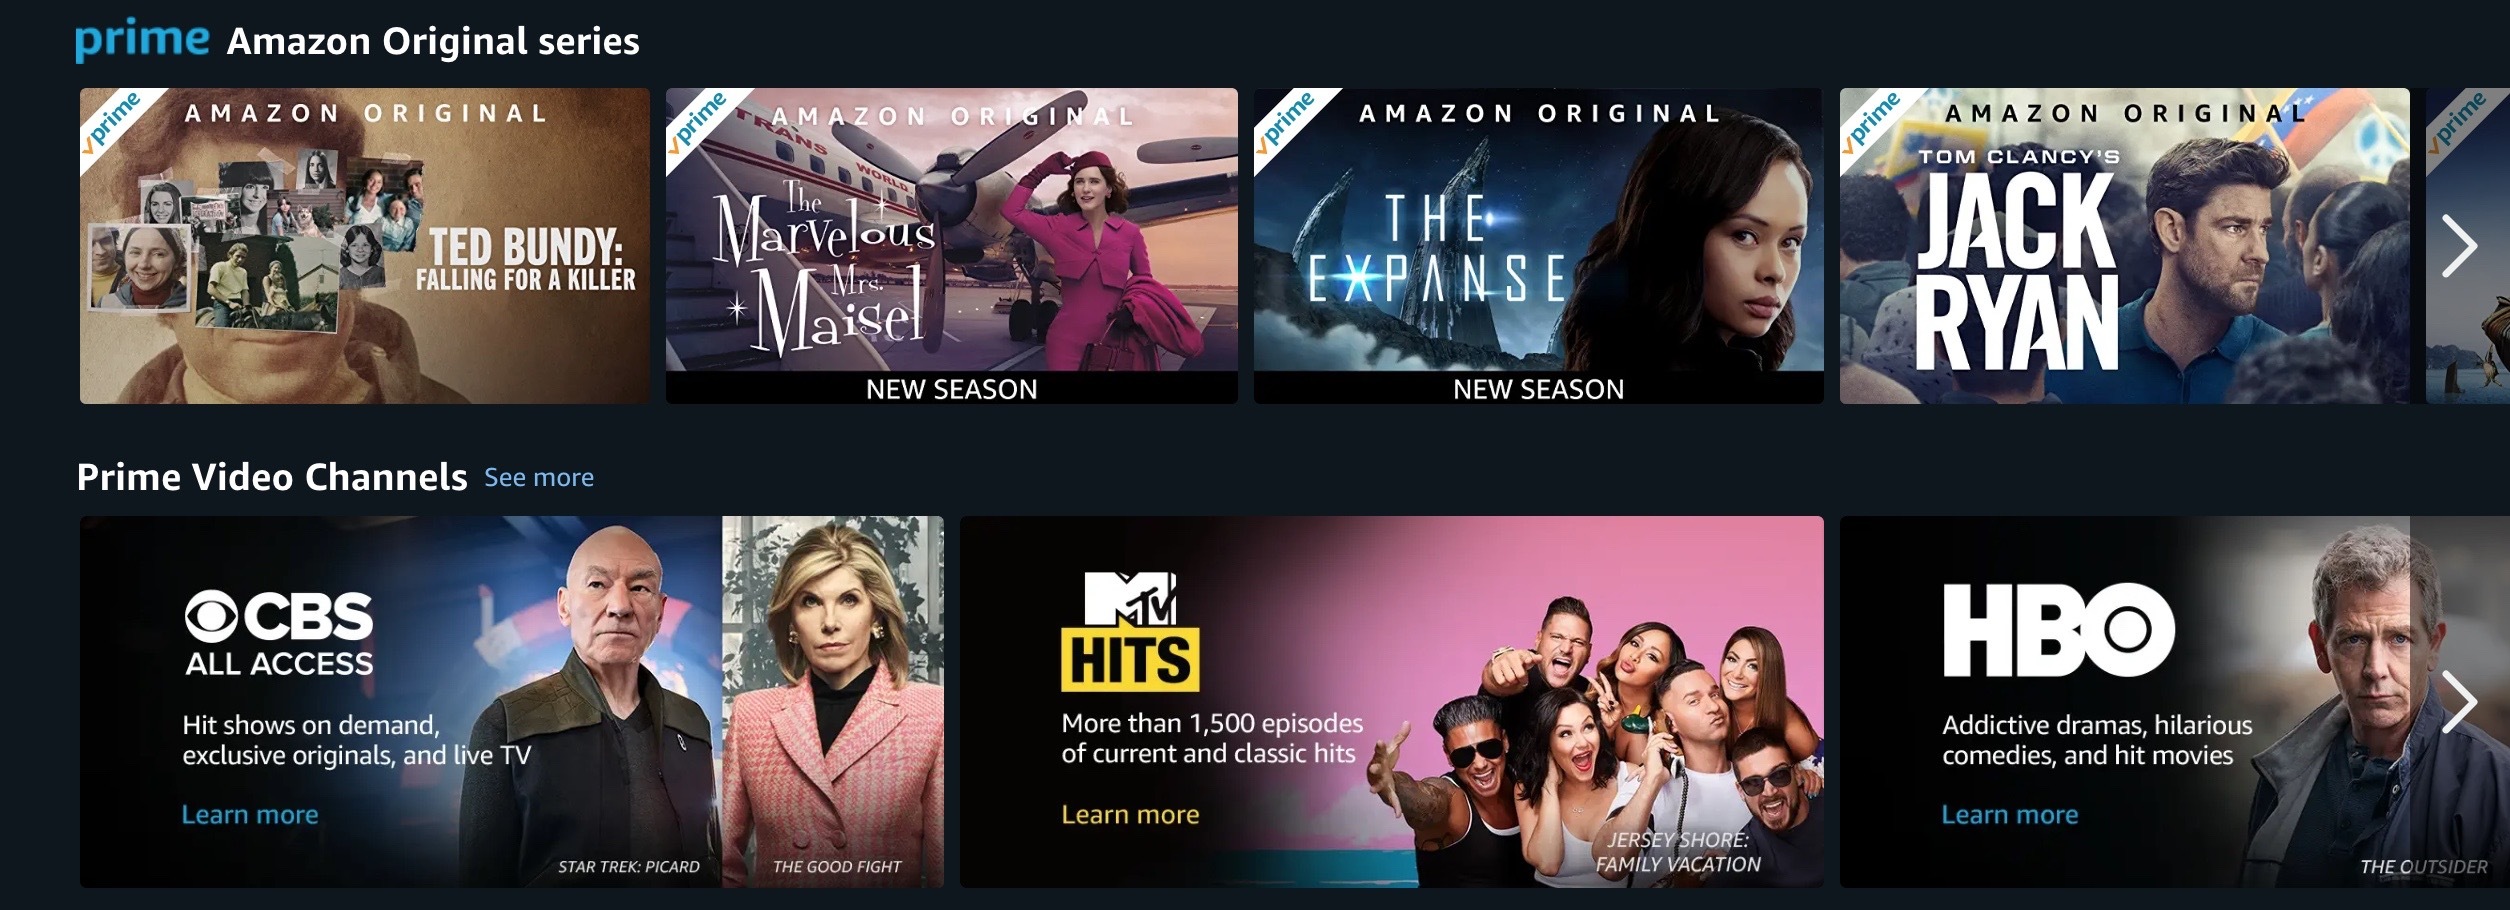 Amazon Channels juxtaposes Amazon Original content with hubs to cooperating SVOD services